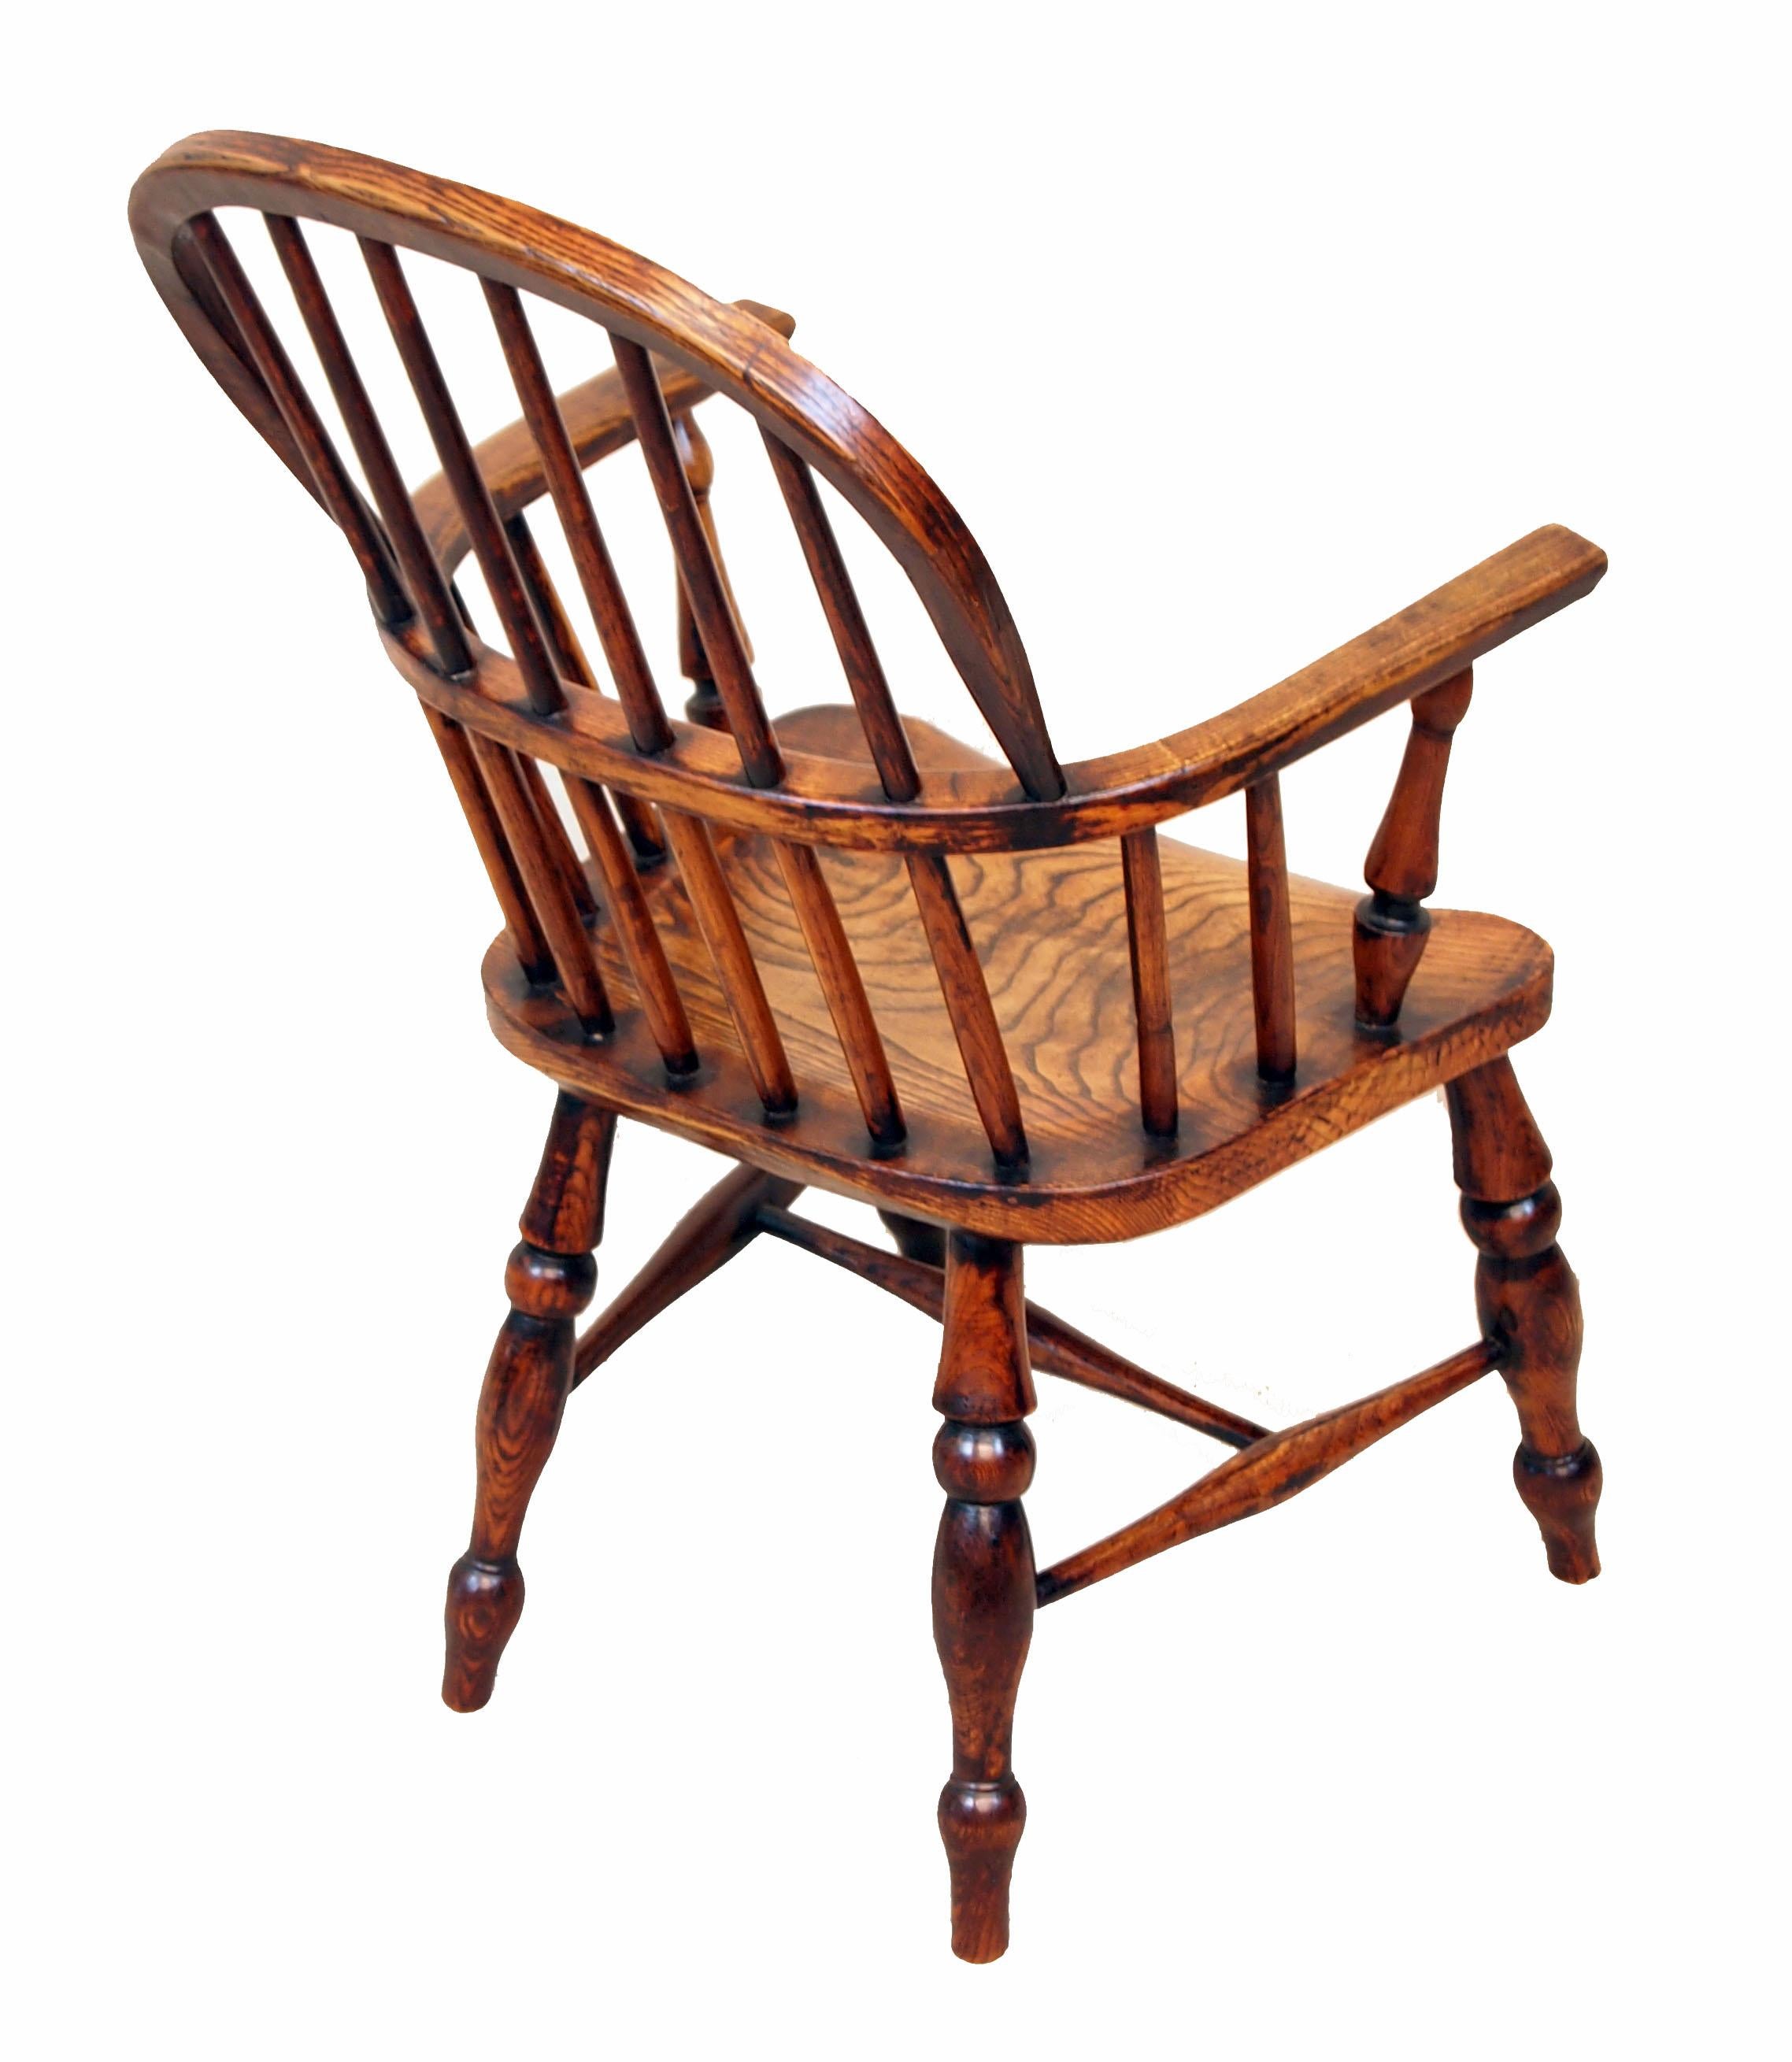 A very attractive mid-19th century childs size
Windsor armchair having elegant stick back over
Curved arms and well figured seat raised on
Elegant turned legs with H-stretcher

(Children's, or Childs Chairs as the name suggests were
made